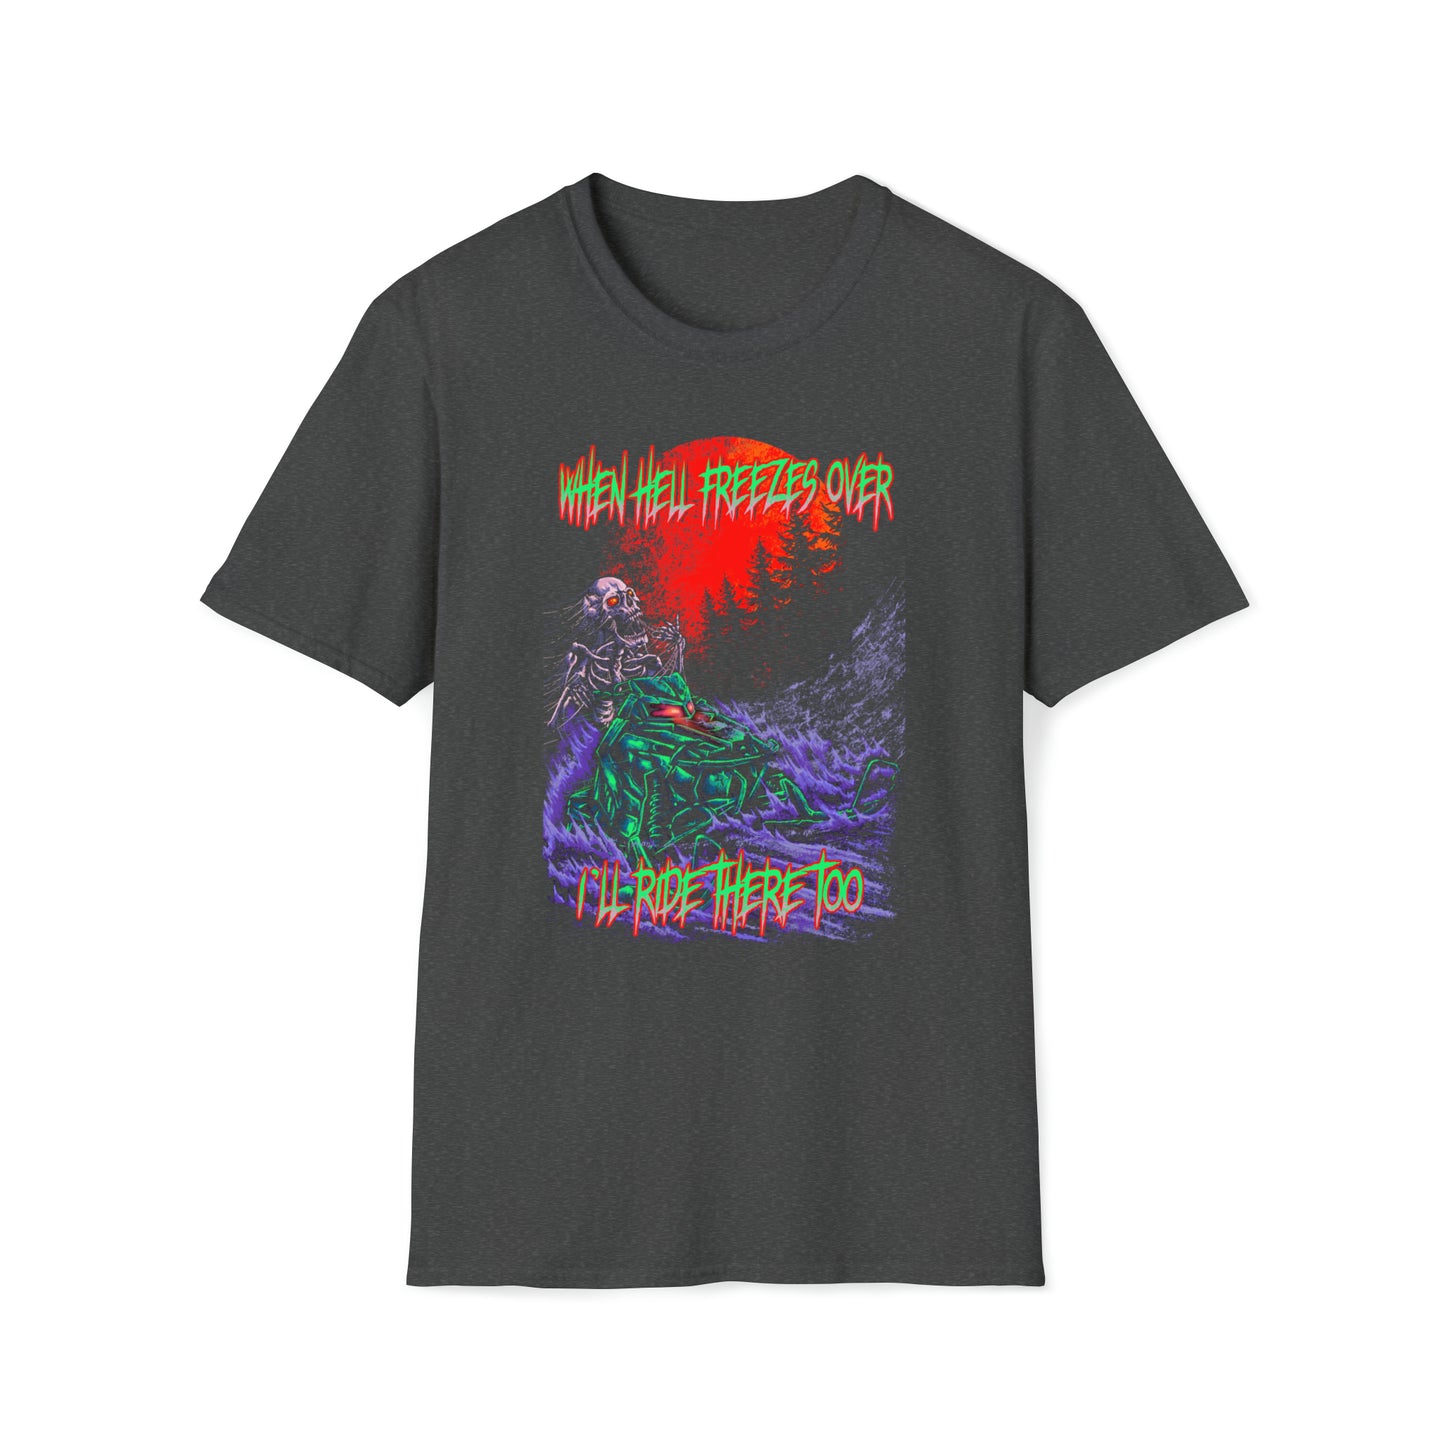 Youth "Hell Freezes Over" Tee